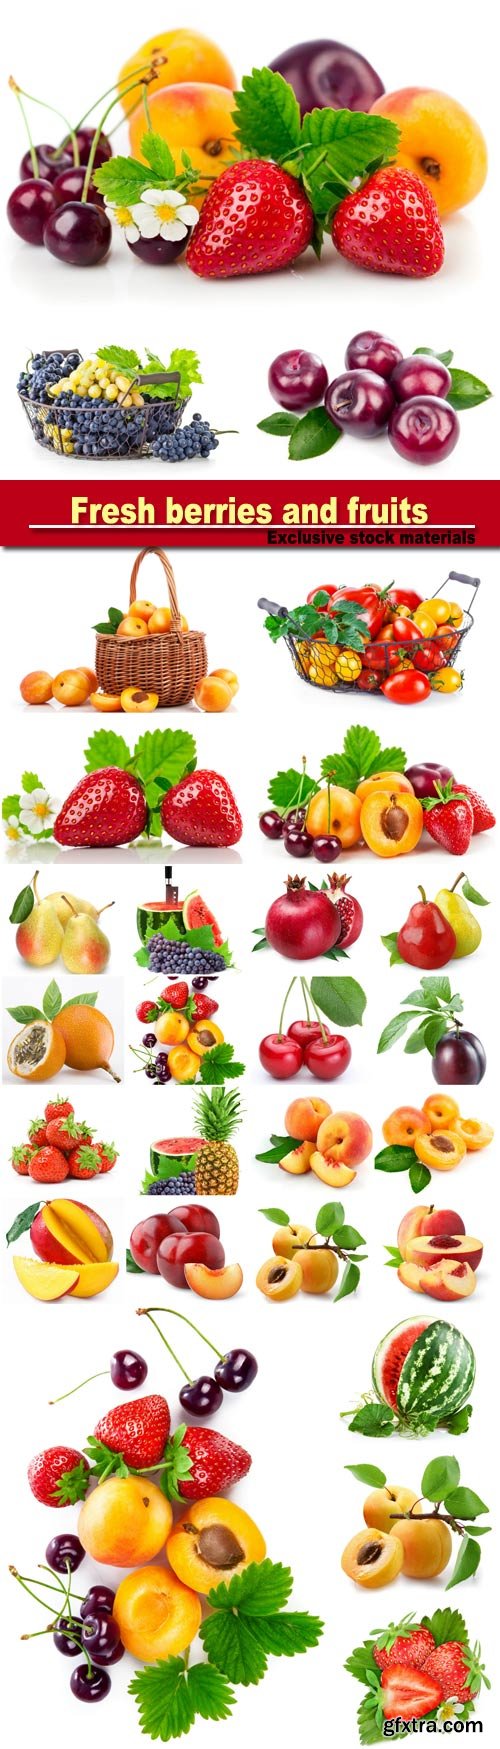 Fresh berries and fruits in still life with green leaves strawberry, apricot, cherry, plum isolated on white background